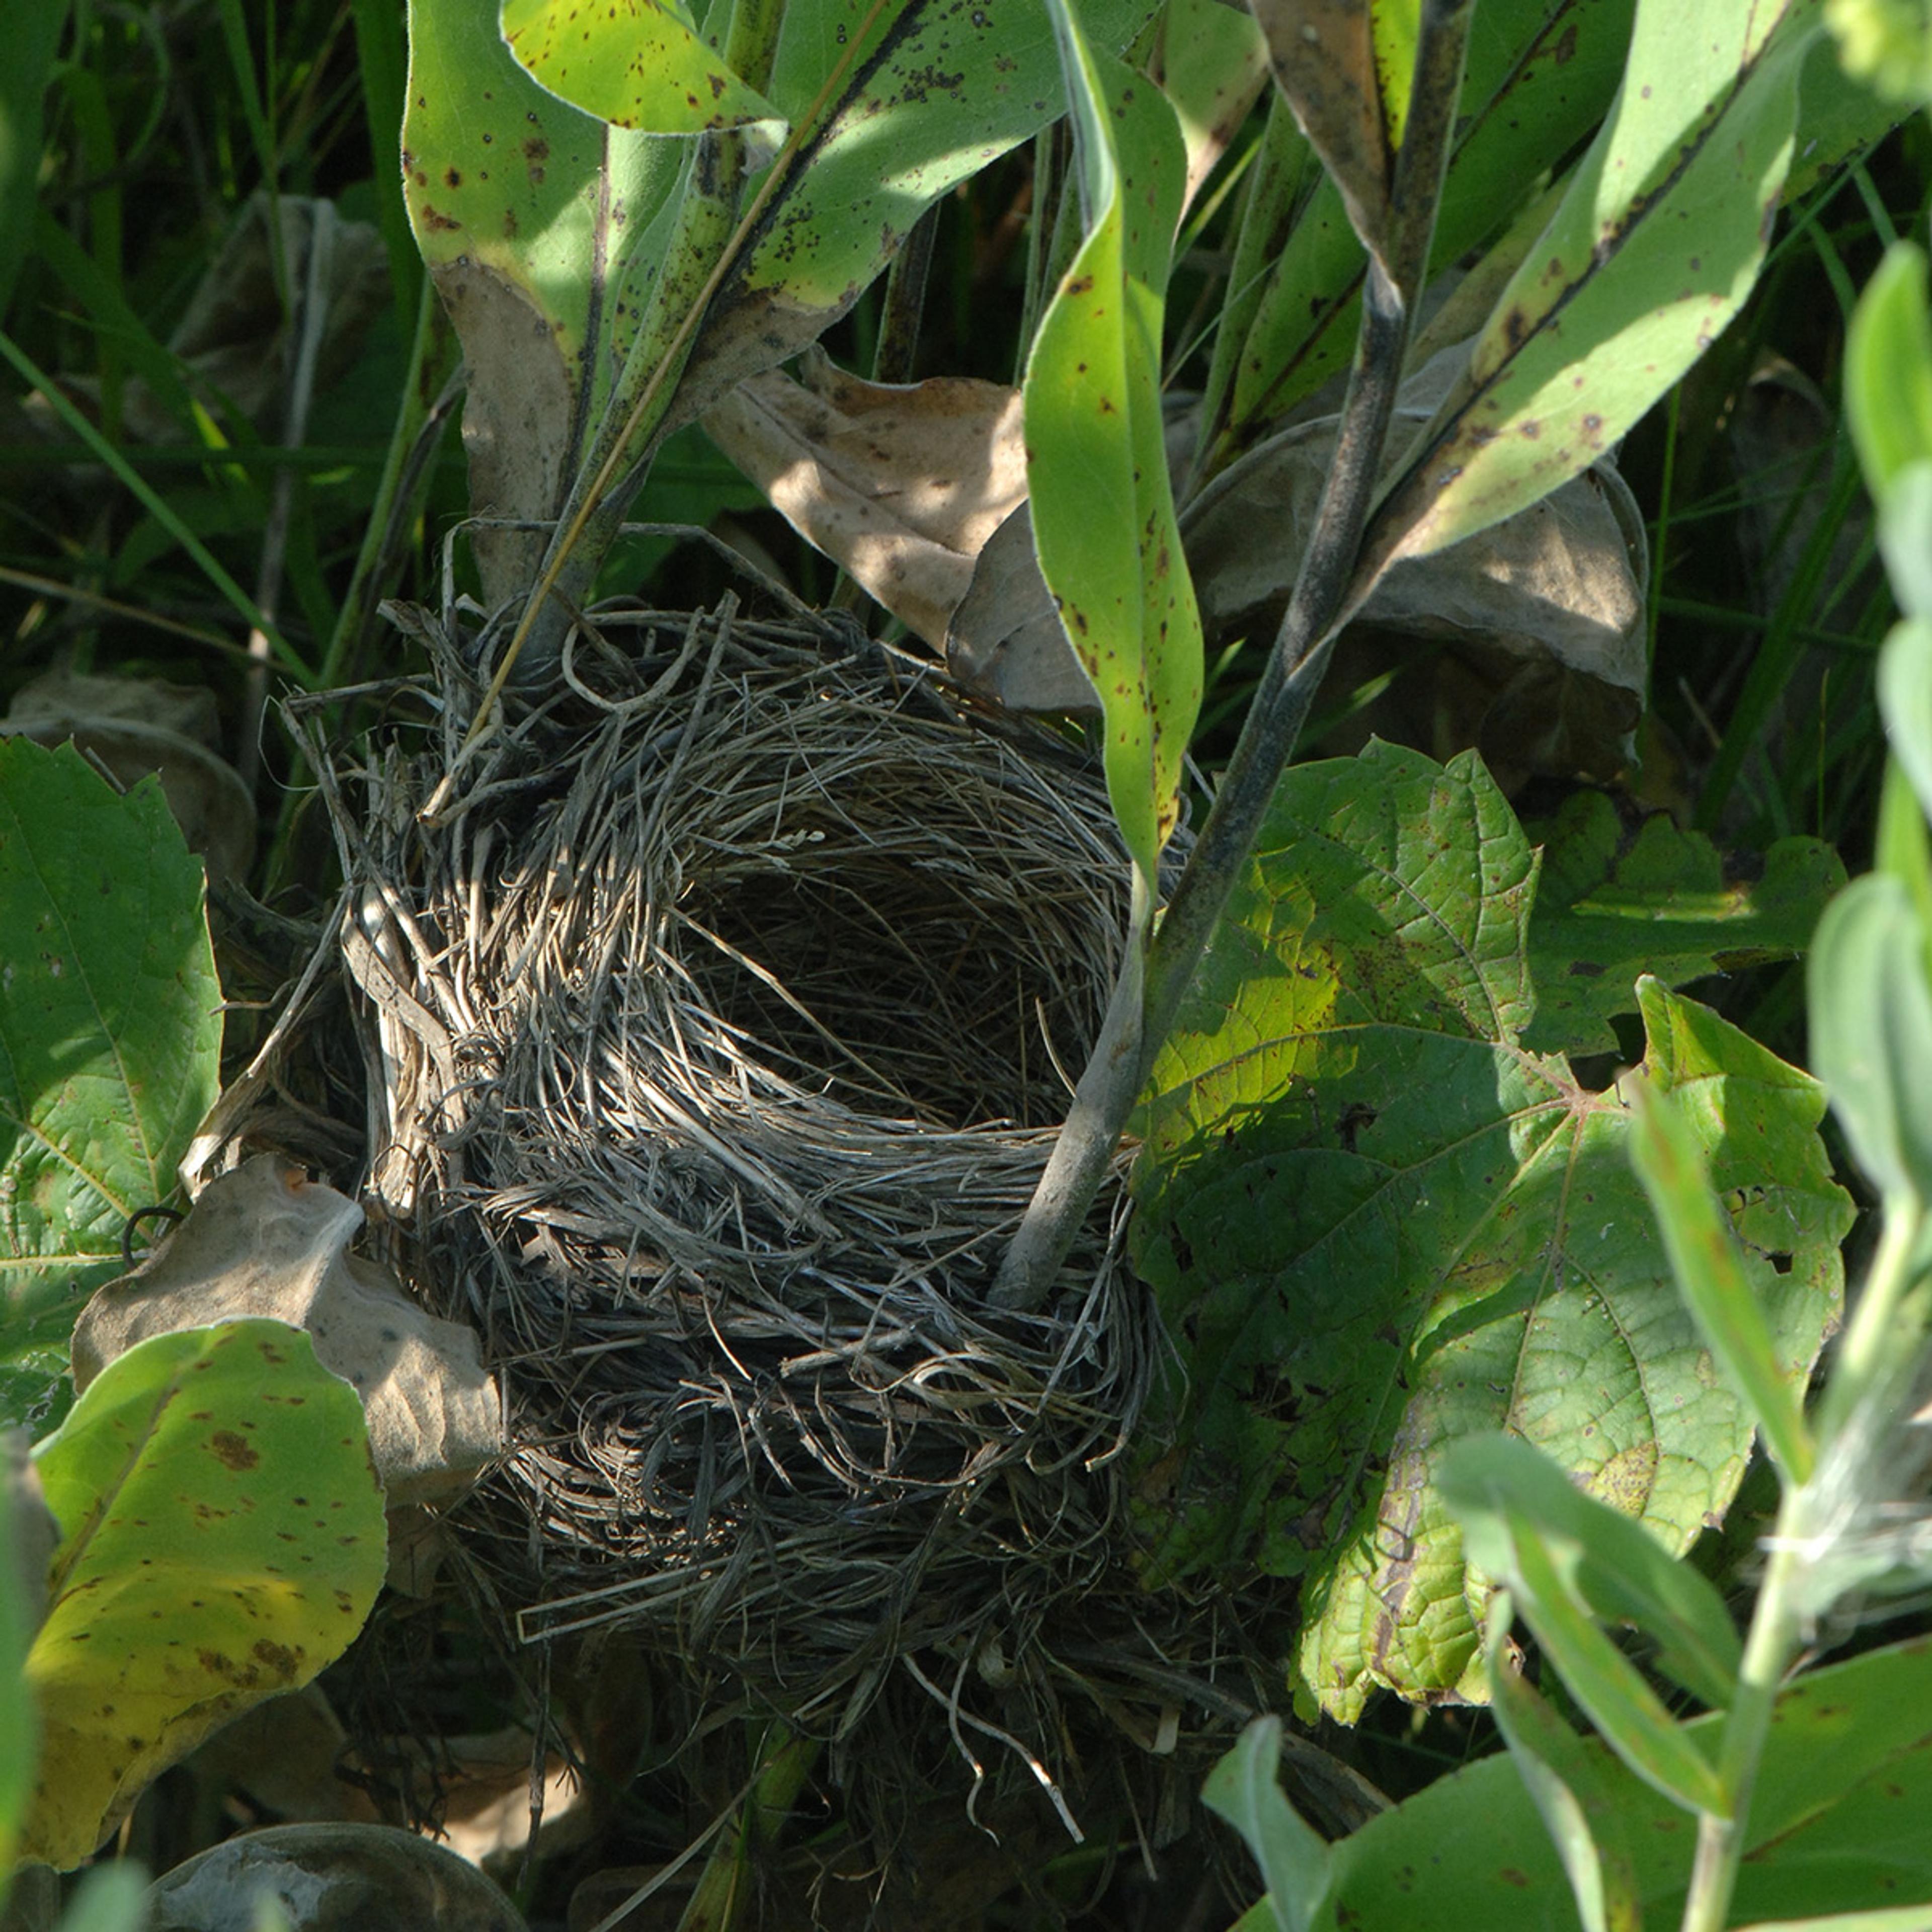 A perfectly formed bird’s nest tucked into some plants.